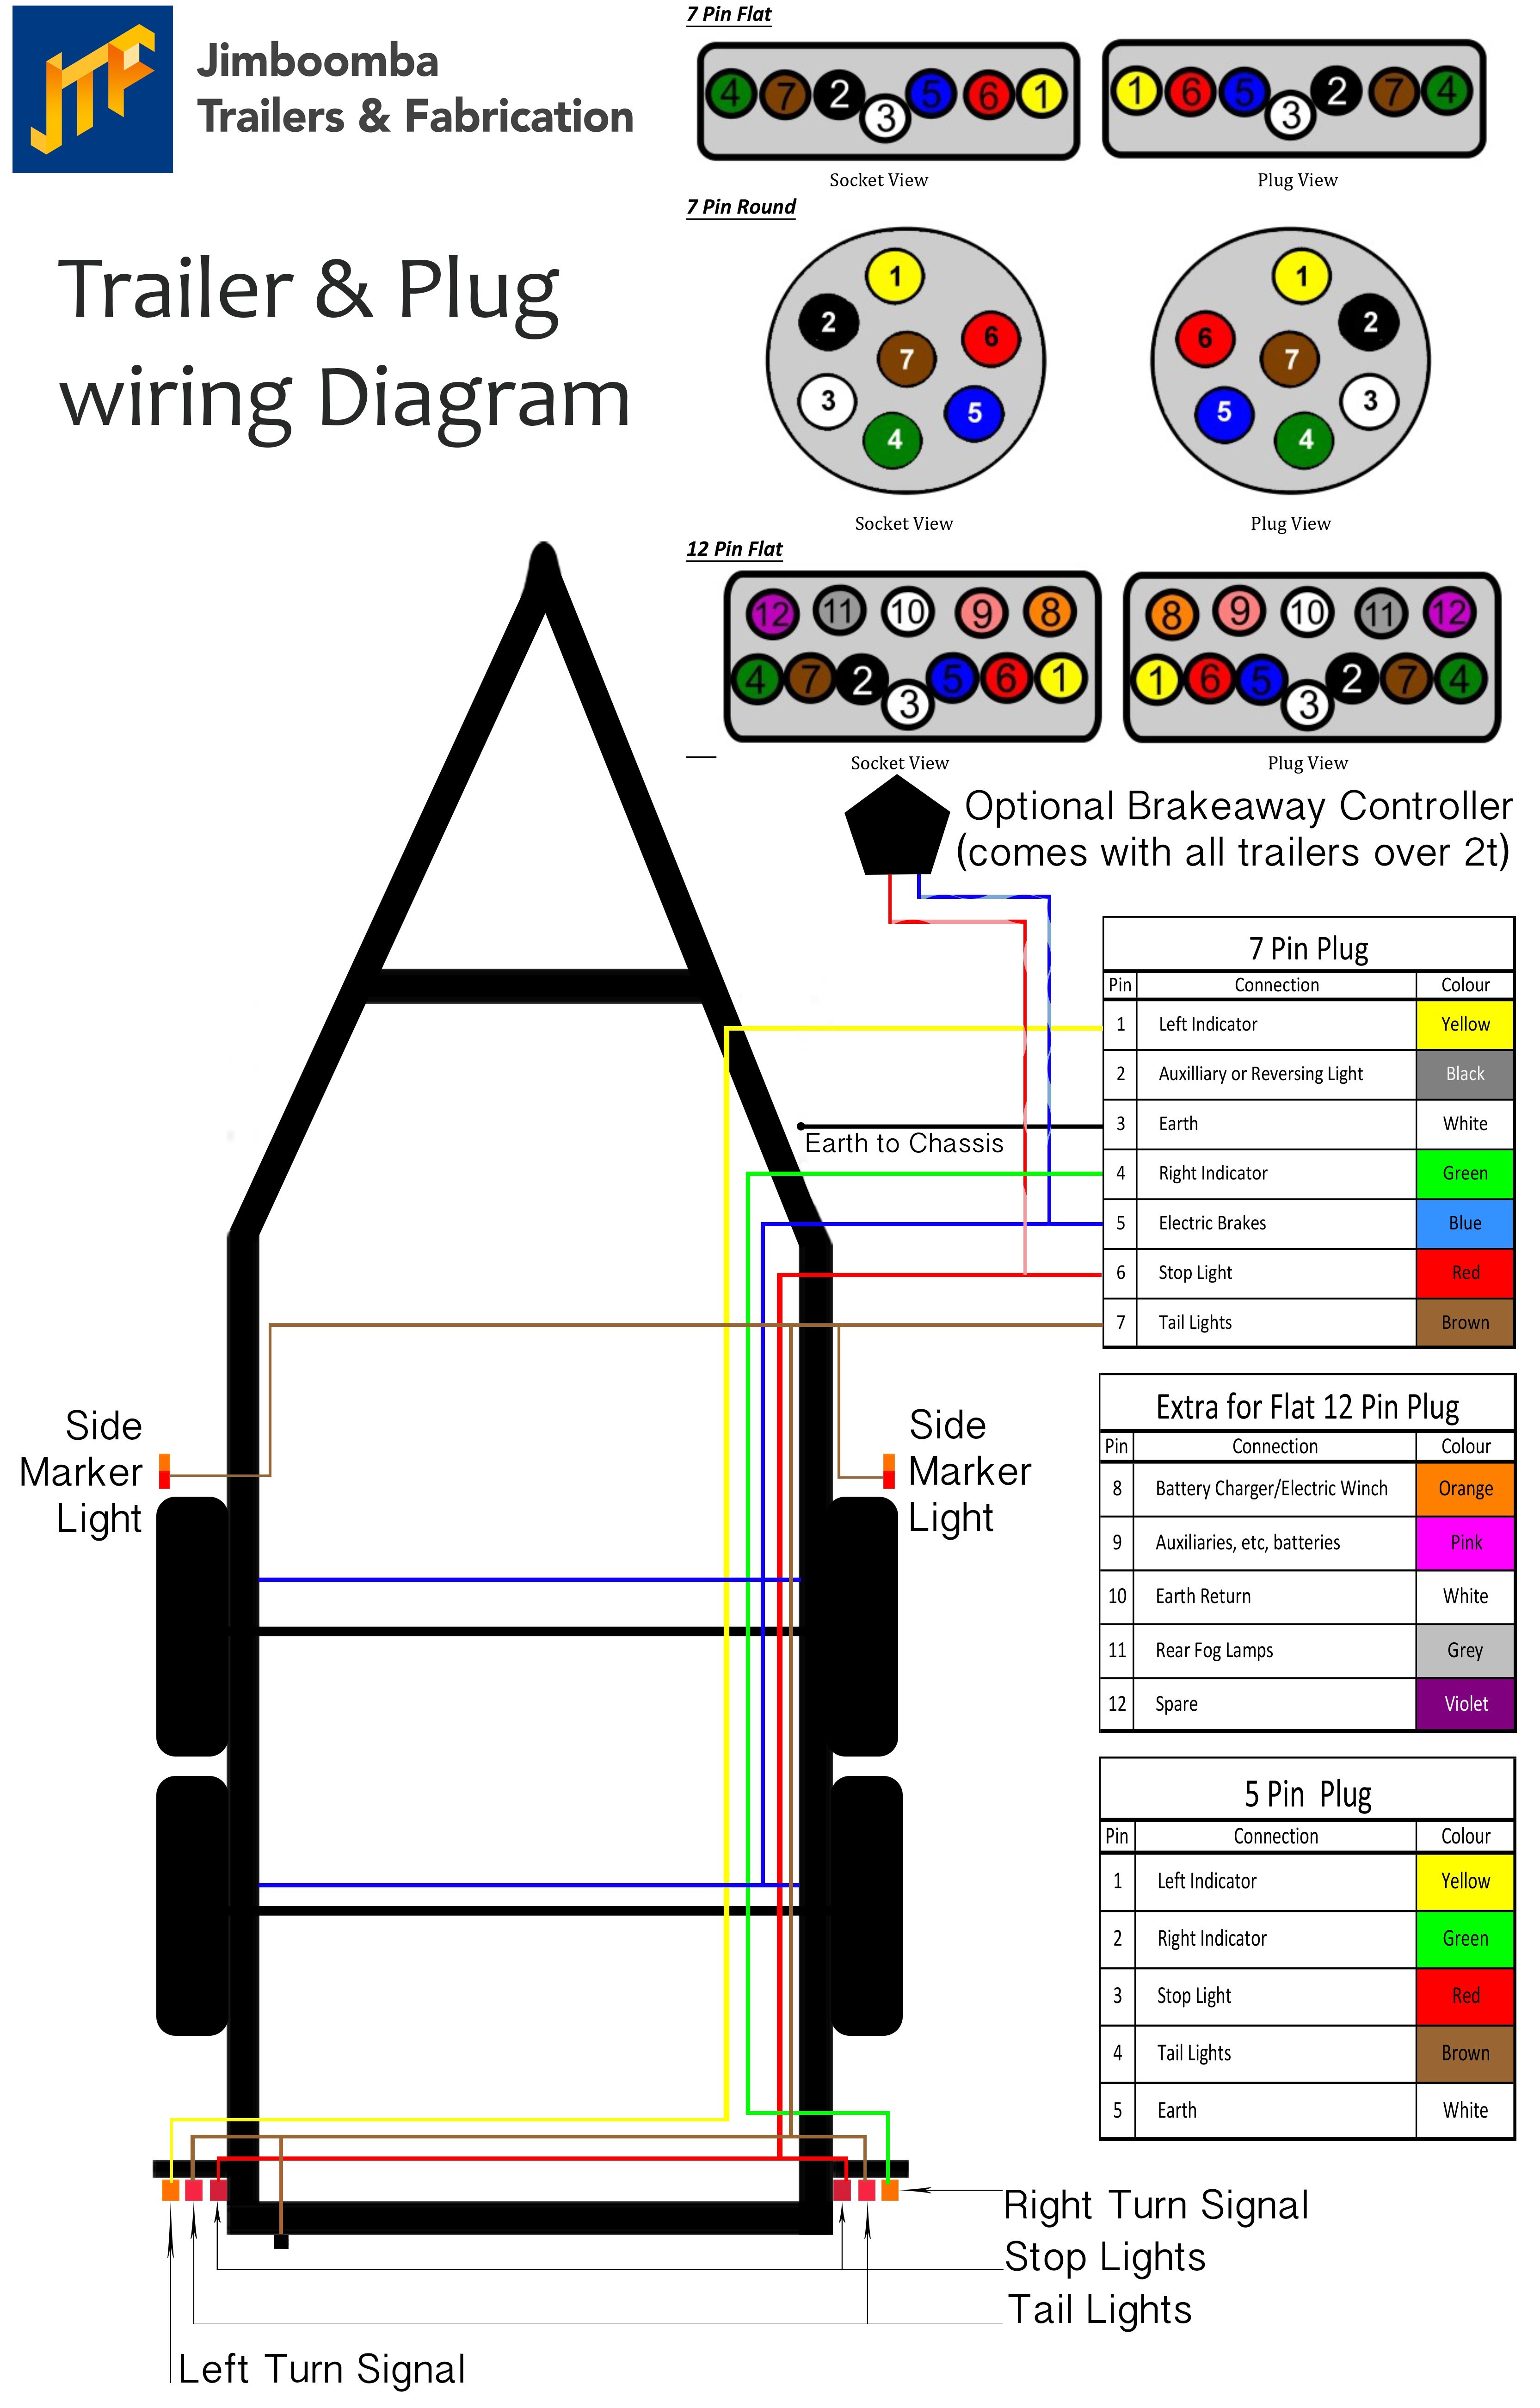 Wiring Diagram for 7 Wire Trailer Plug Diagram 7 Blade Trailer tow Light Trusted Wiring Diagrams Of Wiring Diagram for 7 Wire Trailer Plug